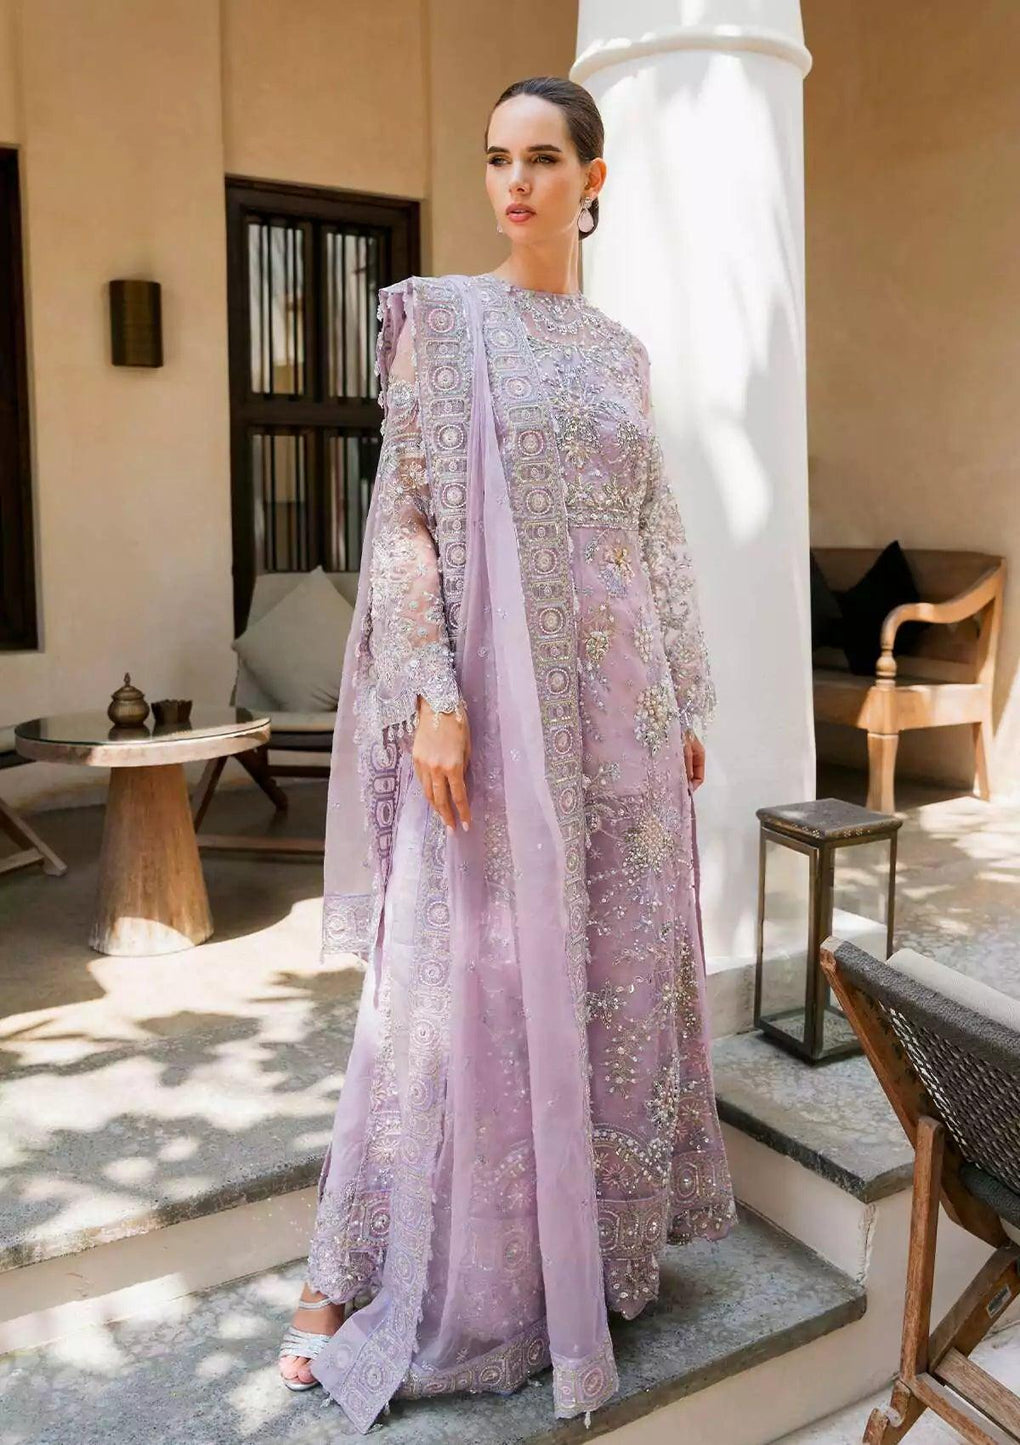 EEW-01-ESFIR-Elaf-premium-Evara-chapter-2-Wedding-Unstiched-Collection-Inlcludes-Luxury-Formal-Designs-and-Bridal-Dresses-Amazing-OnlineShopping-Experience-Esfir-Lilac-Design-PakistaniFormaldresses-and-asianbridaldresses-bridaldresses